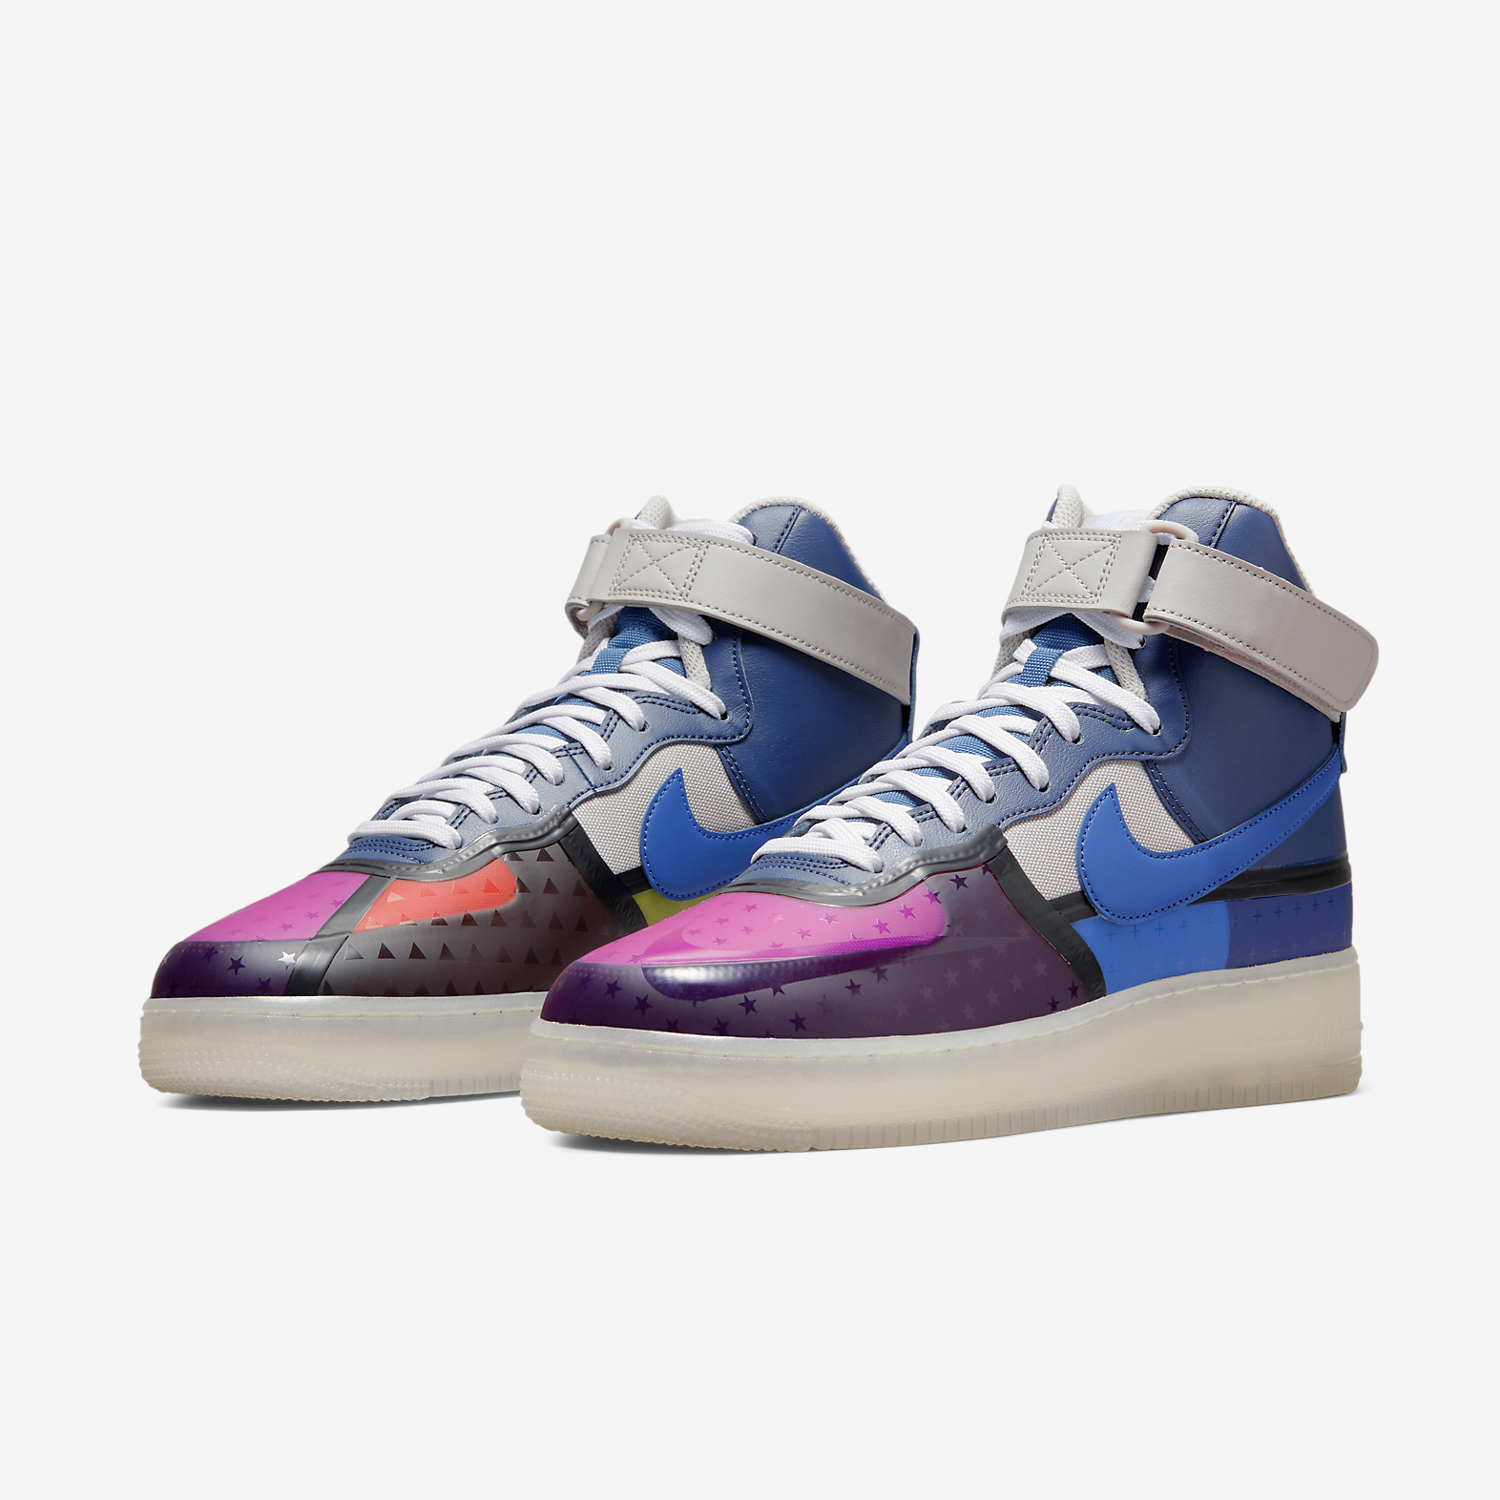 Nike ZoomX foam gives the foot for heightened response - LV x Nike Air  Force 1 07 Low Purple White Running Shoes DM0970 - 100 - StclaircomoShops